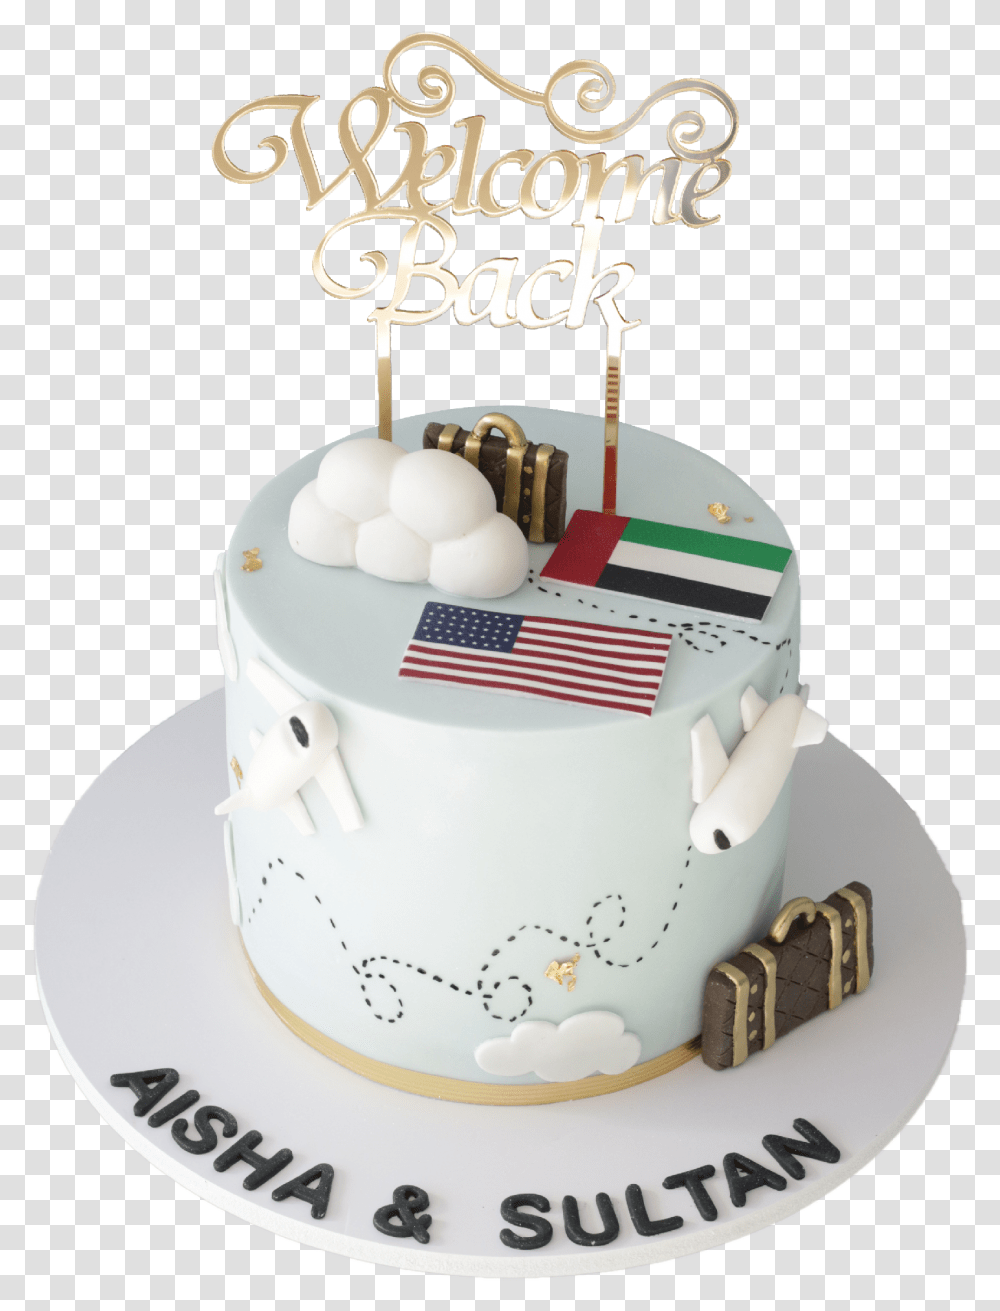 Download Welcome Back Cake Usa To Uae Birthday Cake Full, Dessert, Food, Torte Transparent Png